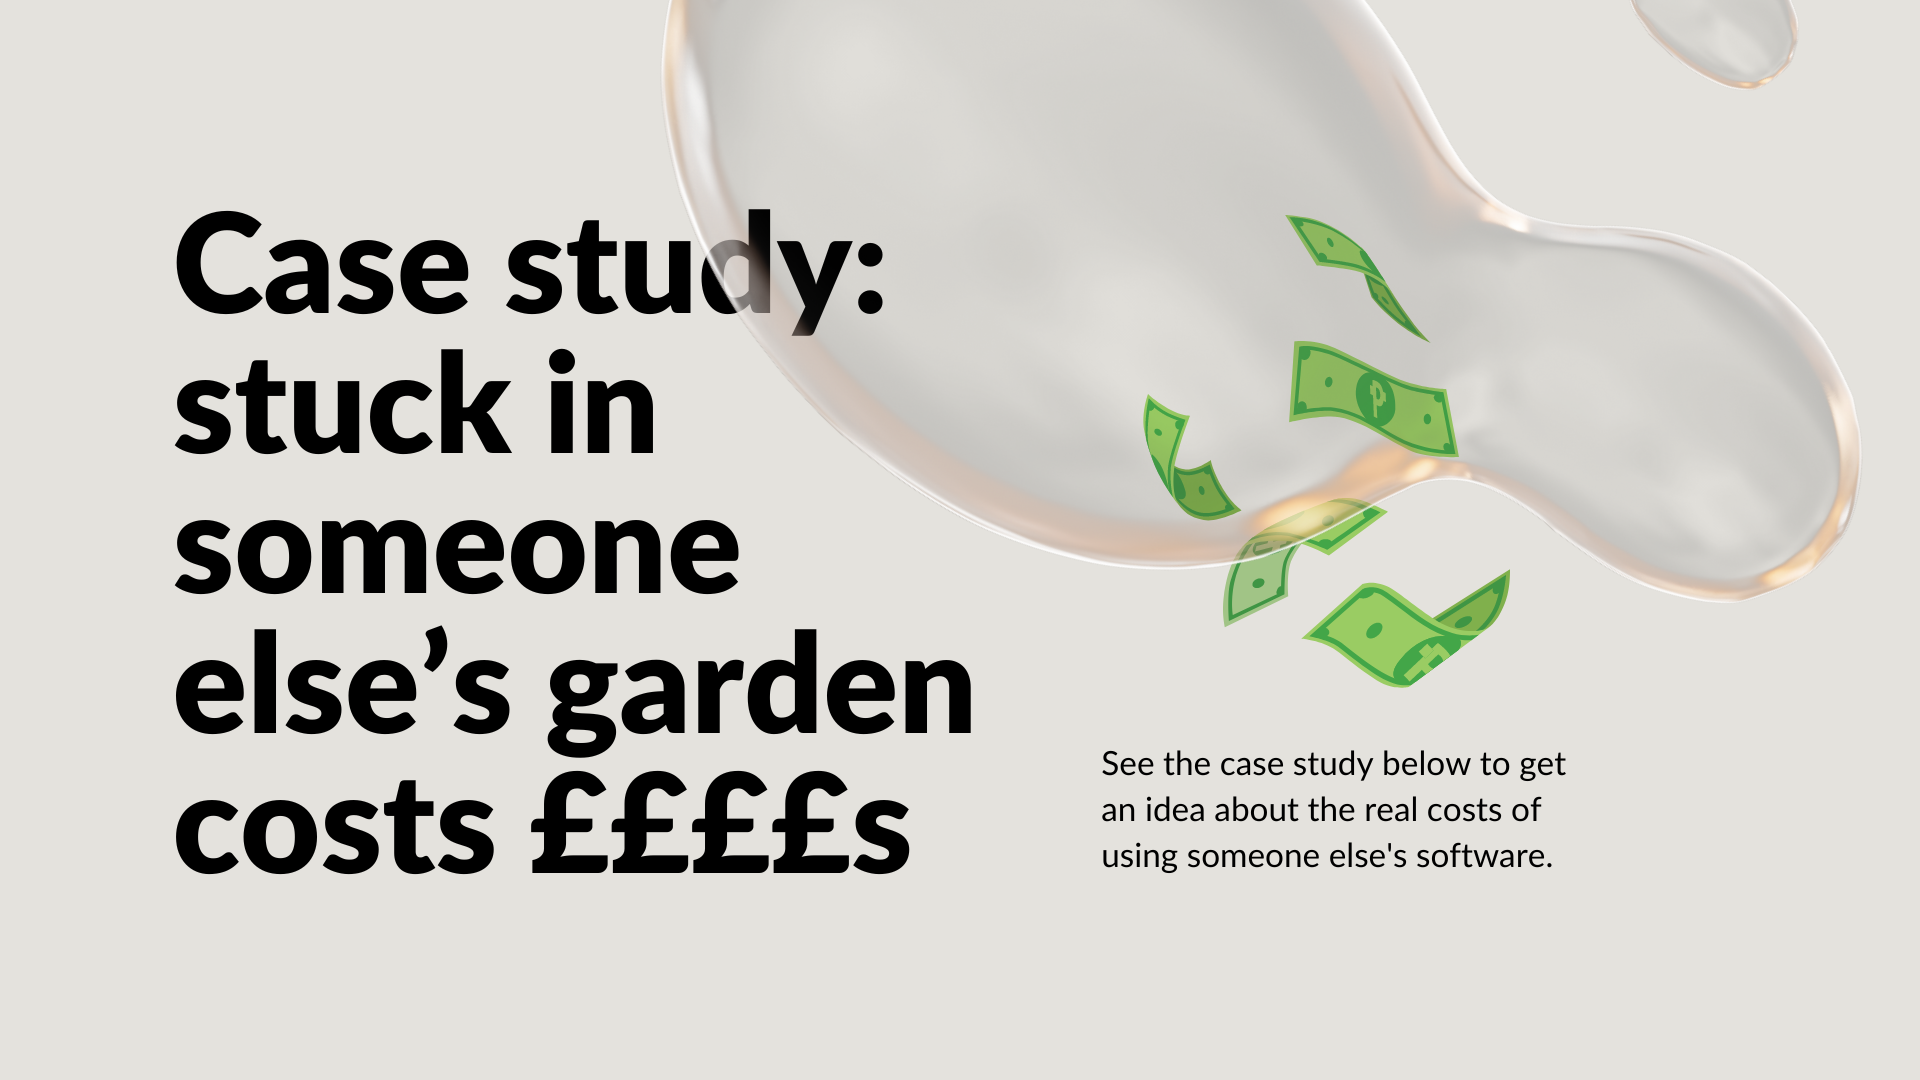 Content in the image reads: Case study: stuck in someone else’s garden costs ££££s. See the case study below to get an idea about the real costs of using someone else's software.